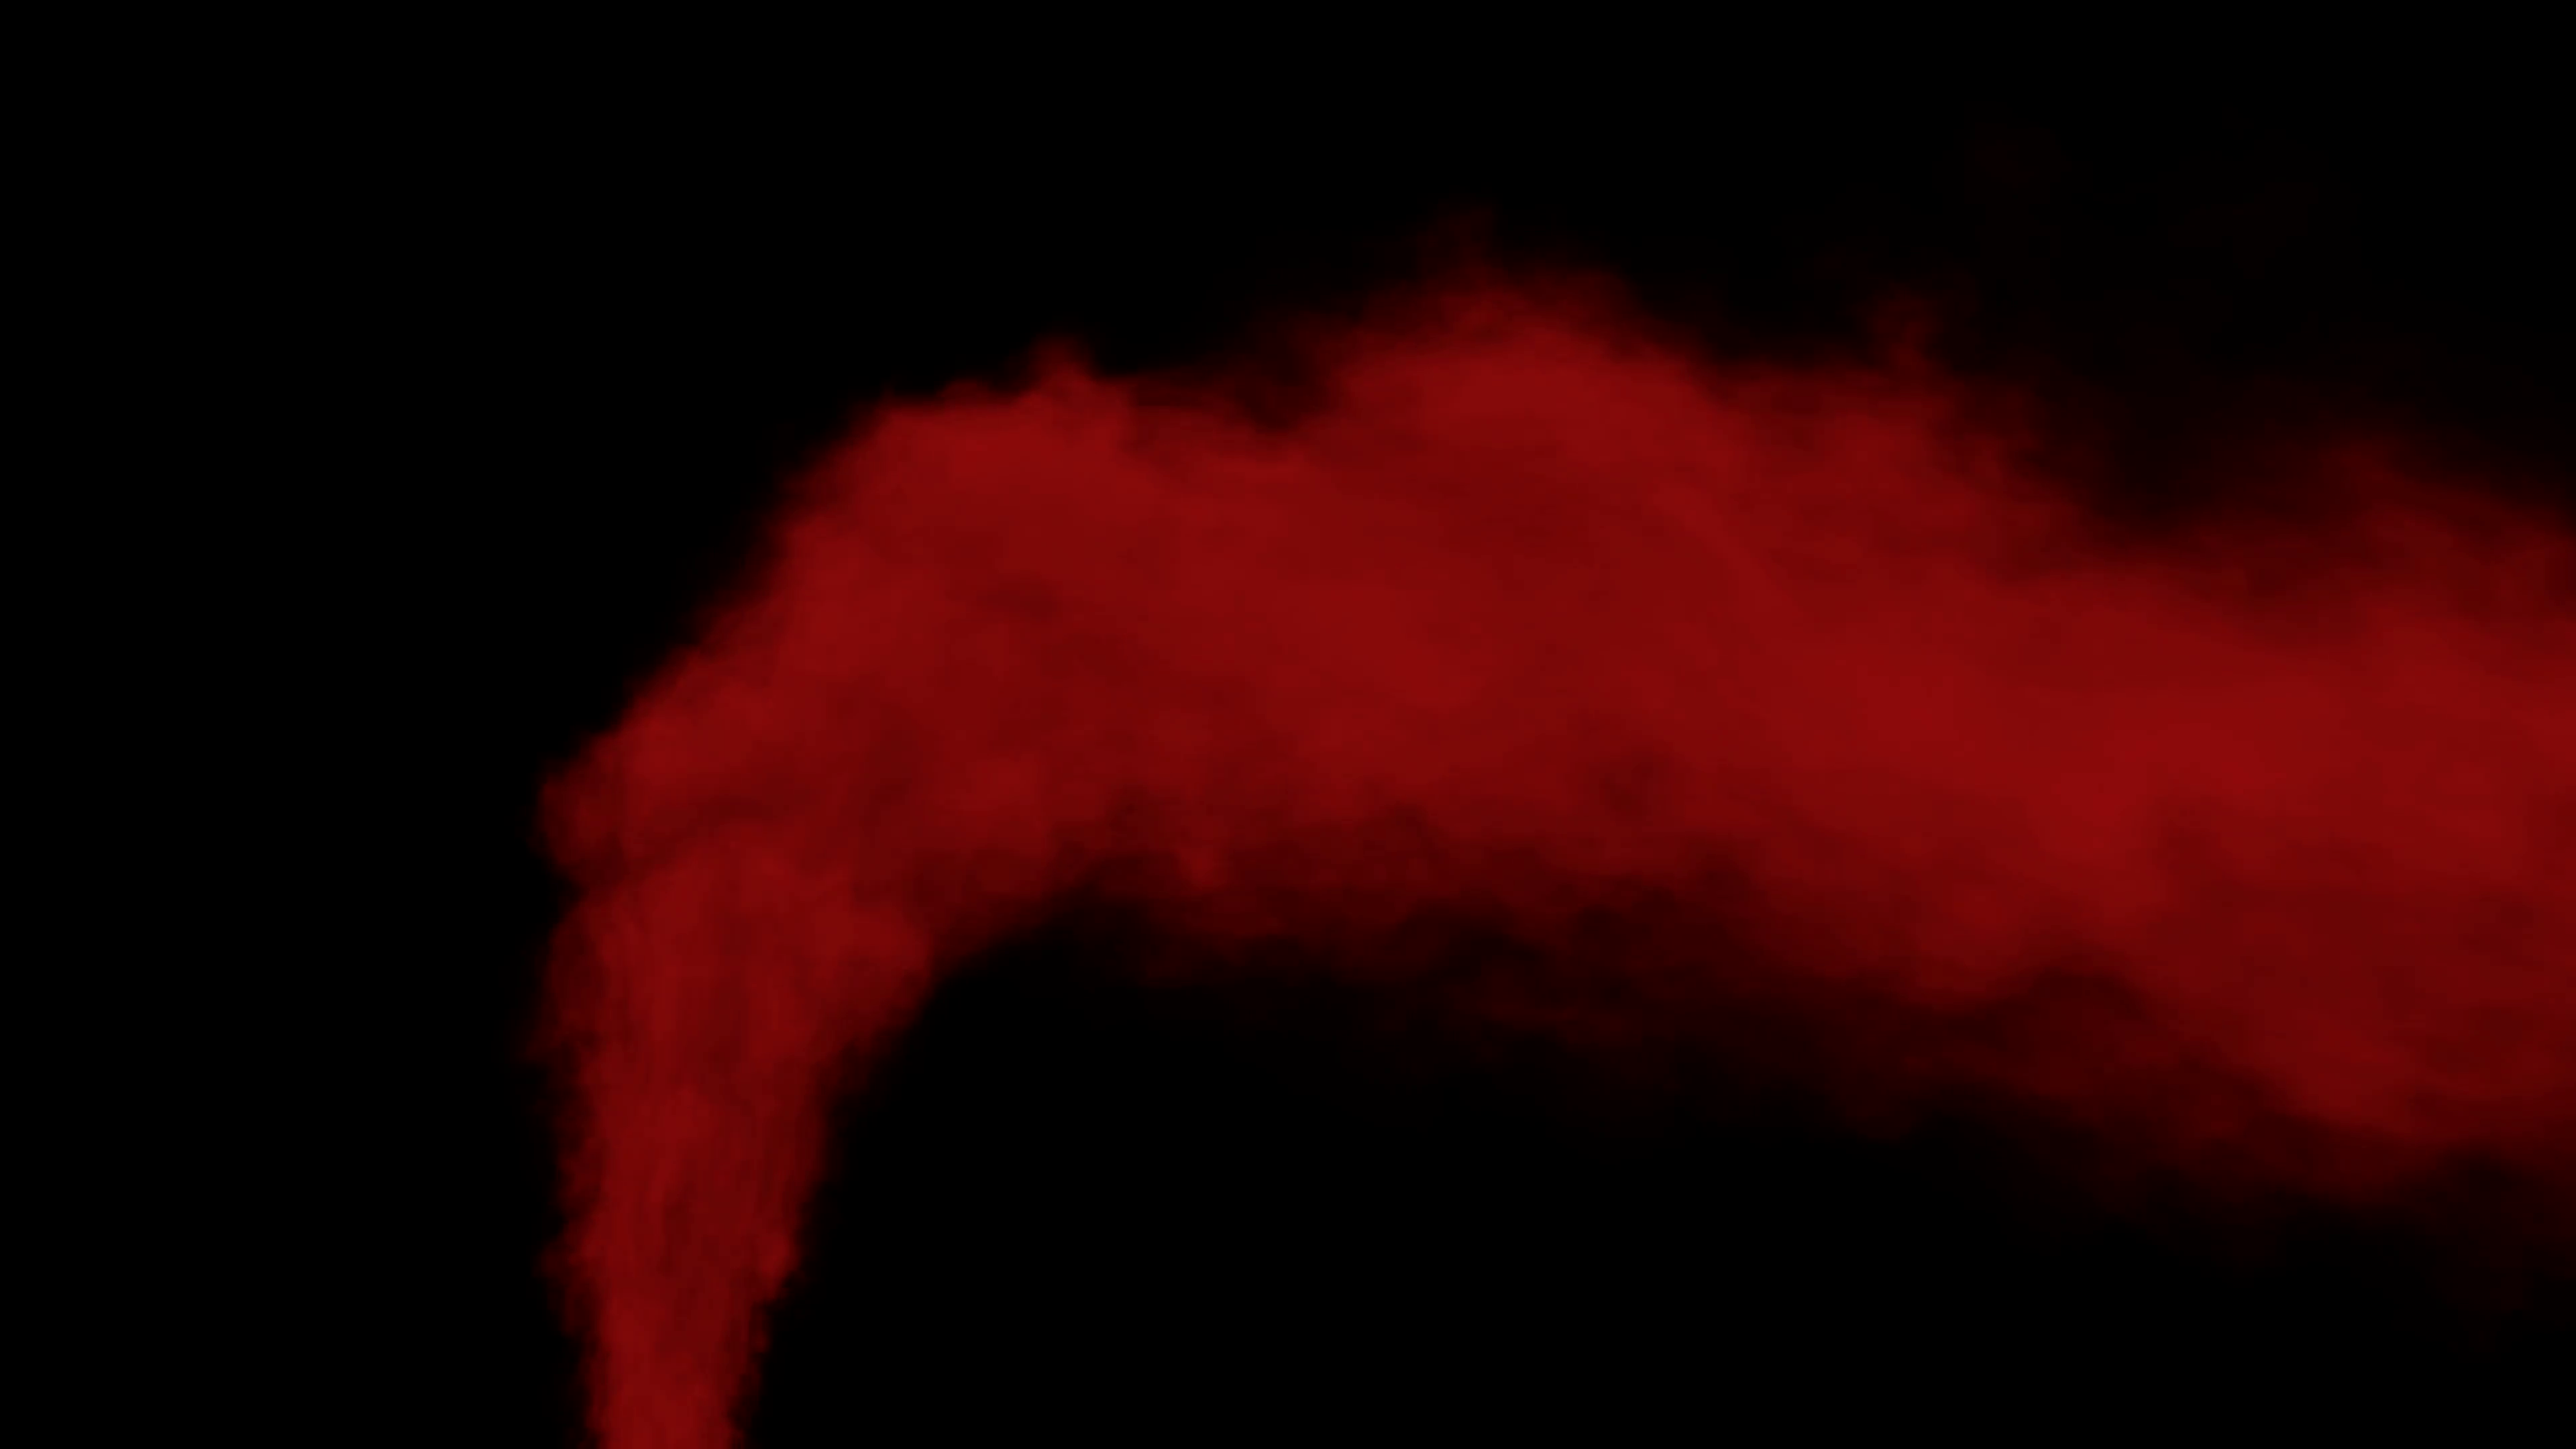 Animated stream of red smoke or toxic gas drifting to the right side